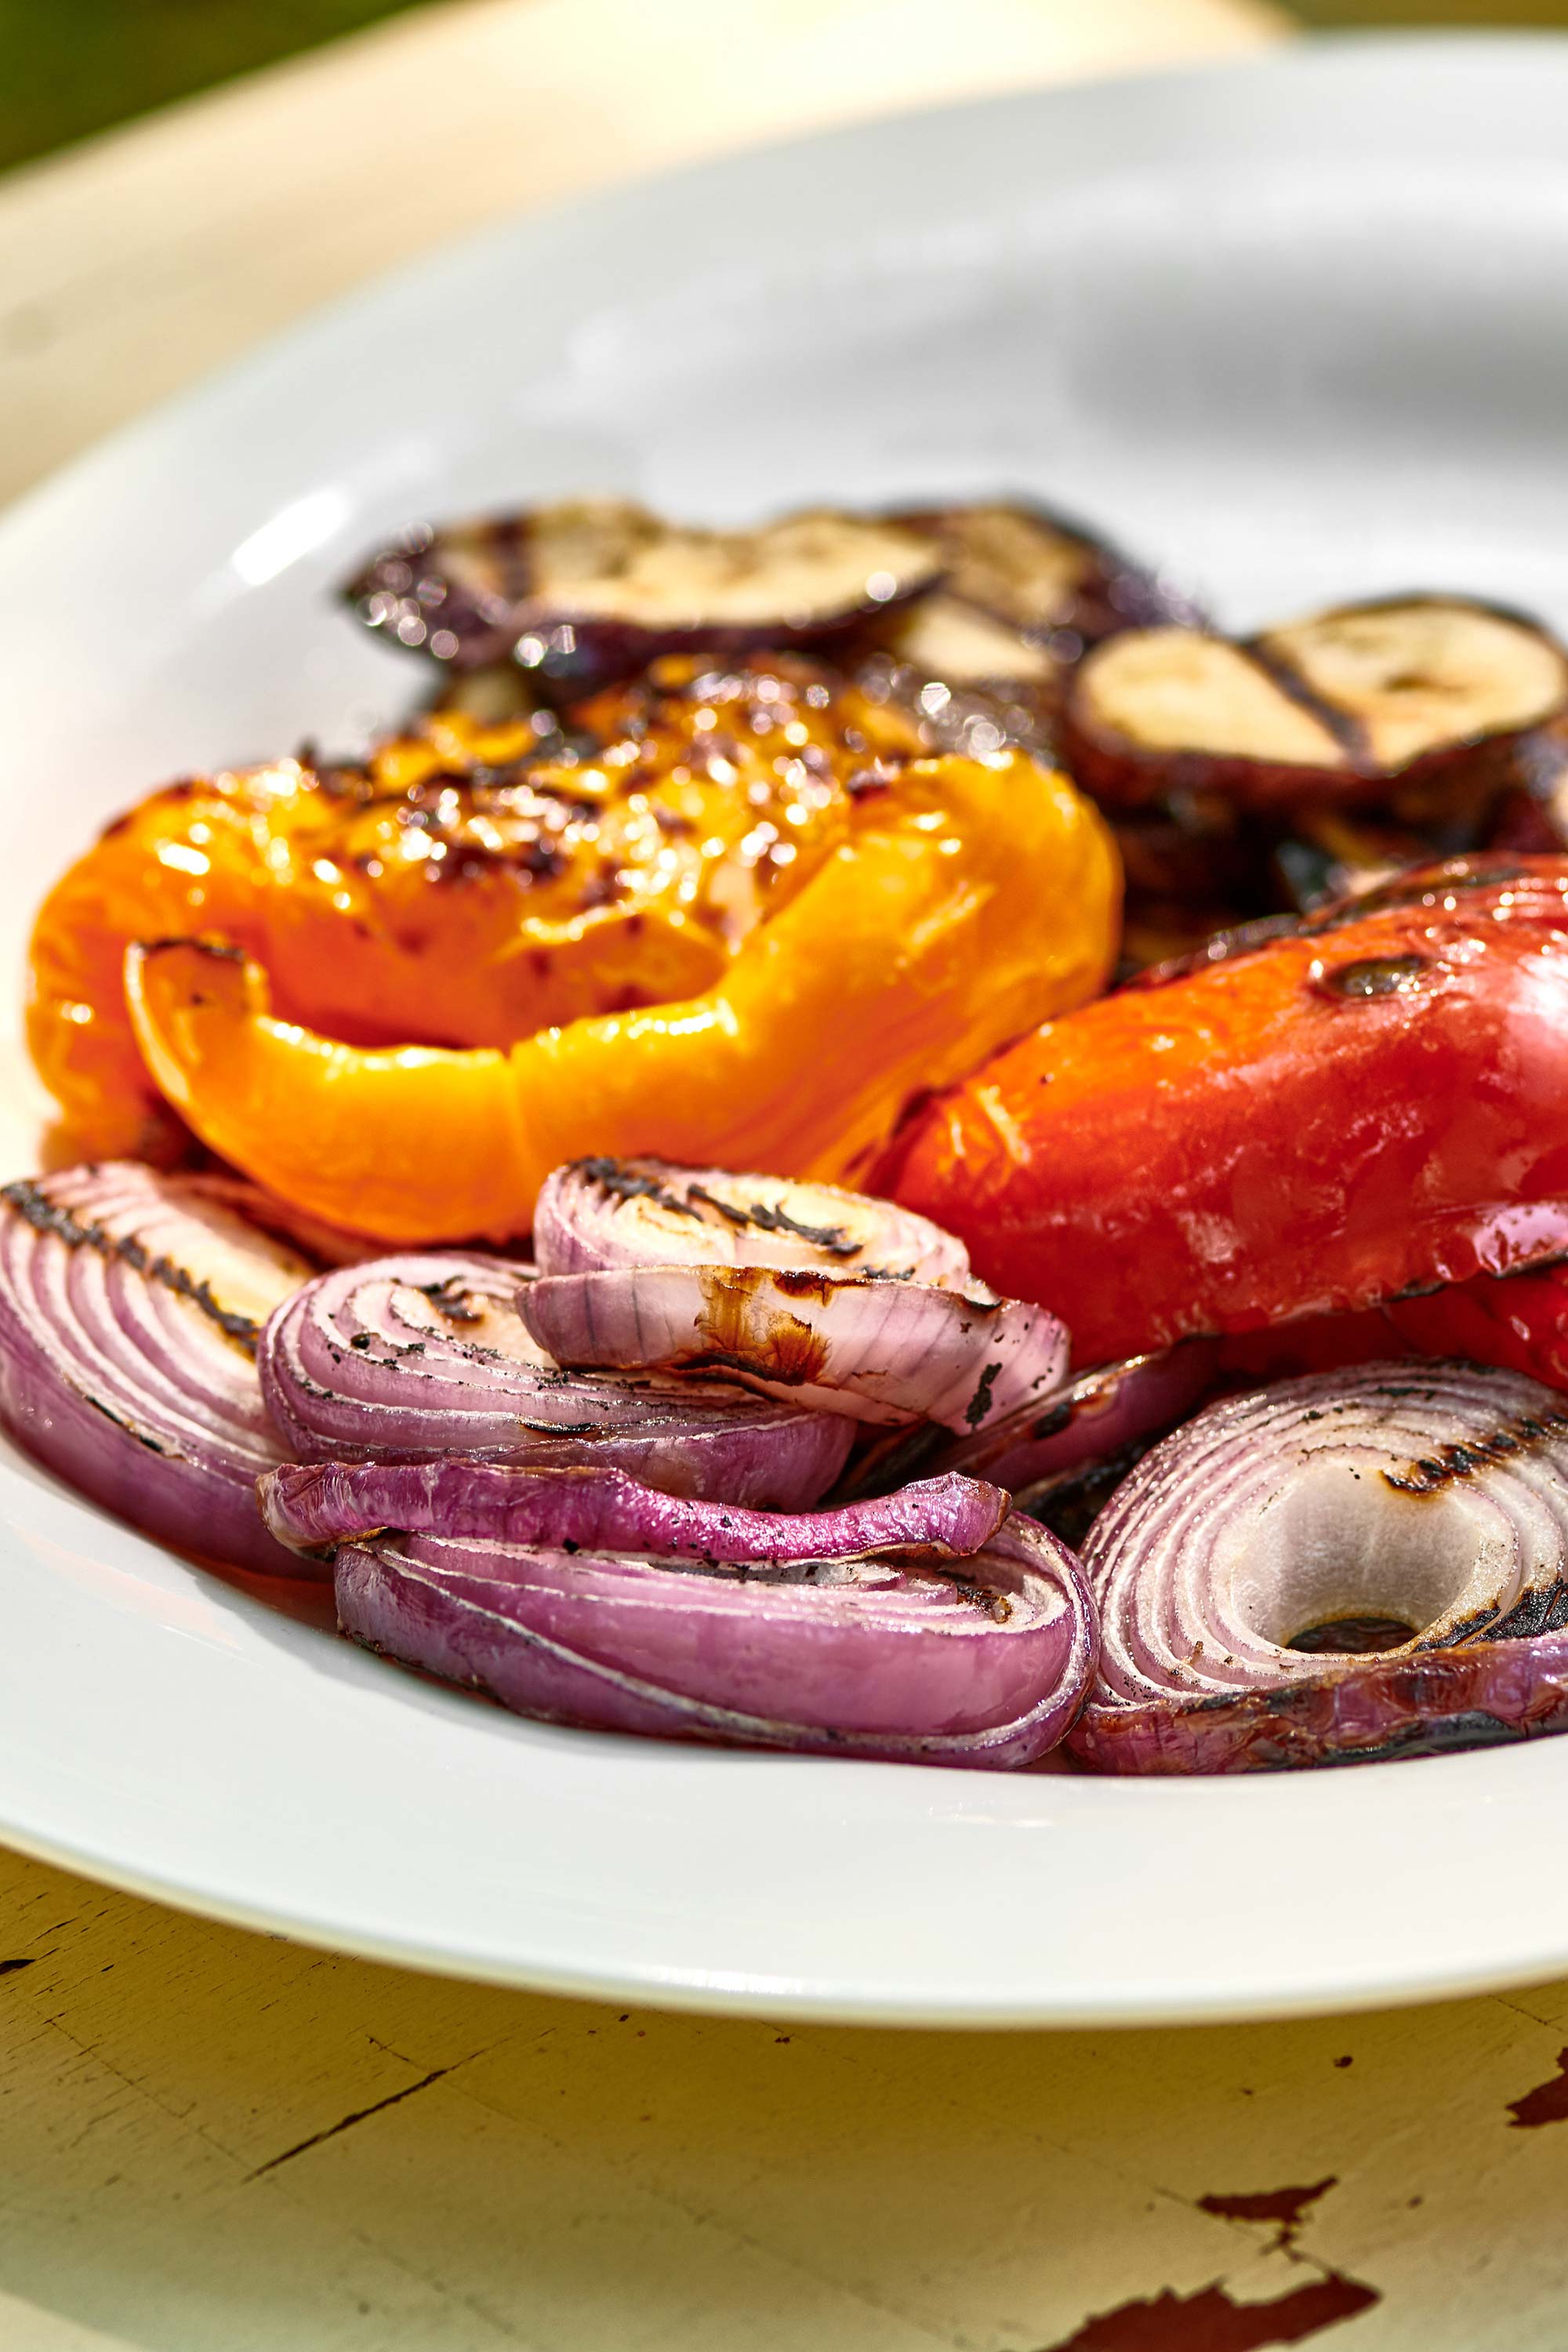 Grilled red onions, bell peppers, and eggplant on a platter.